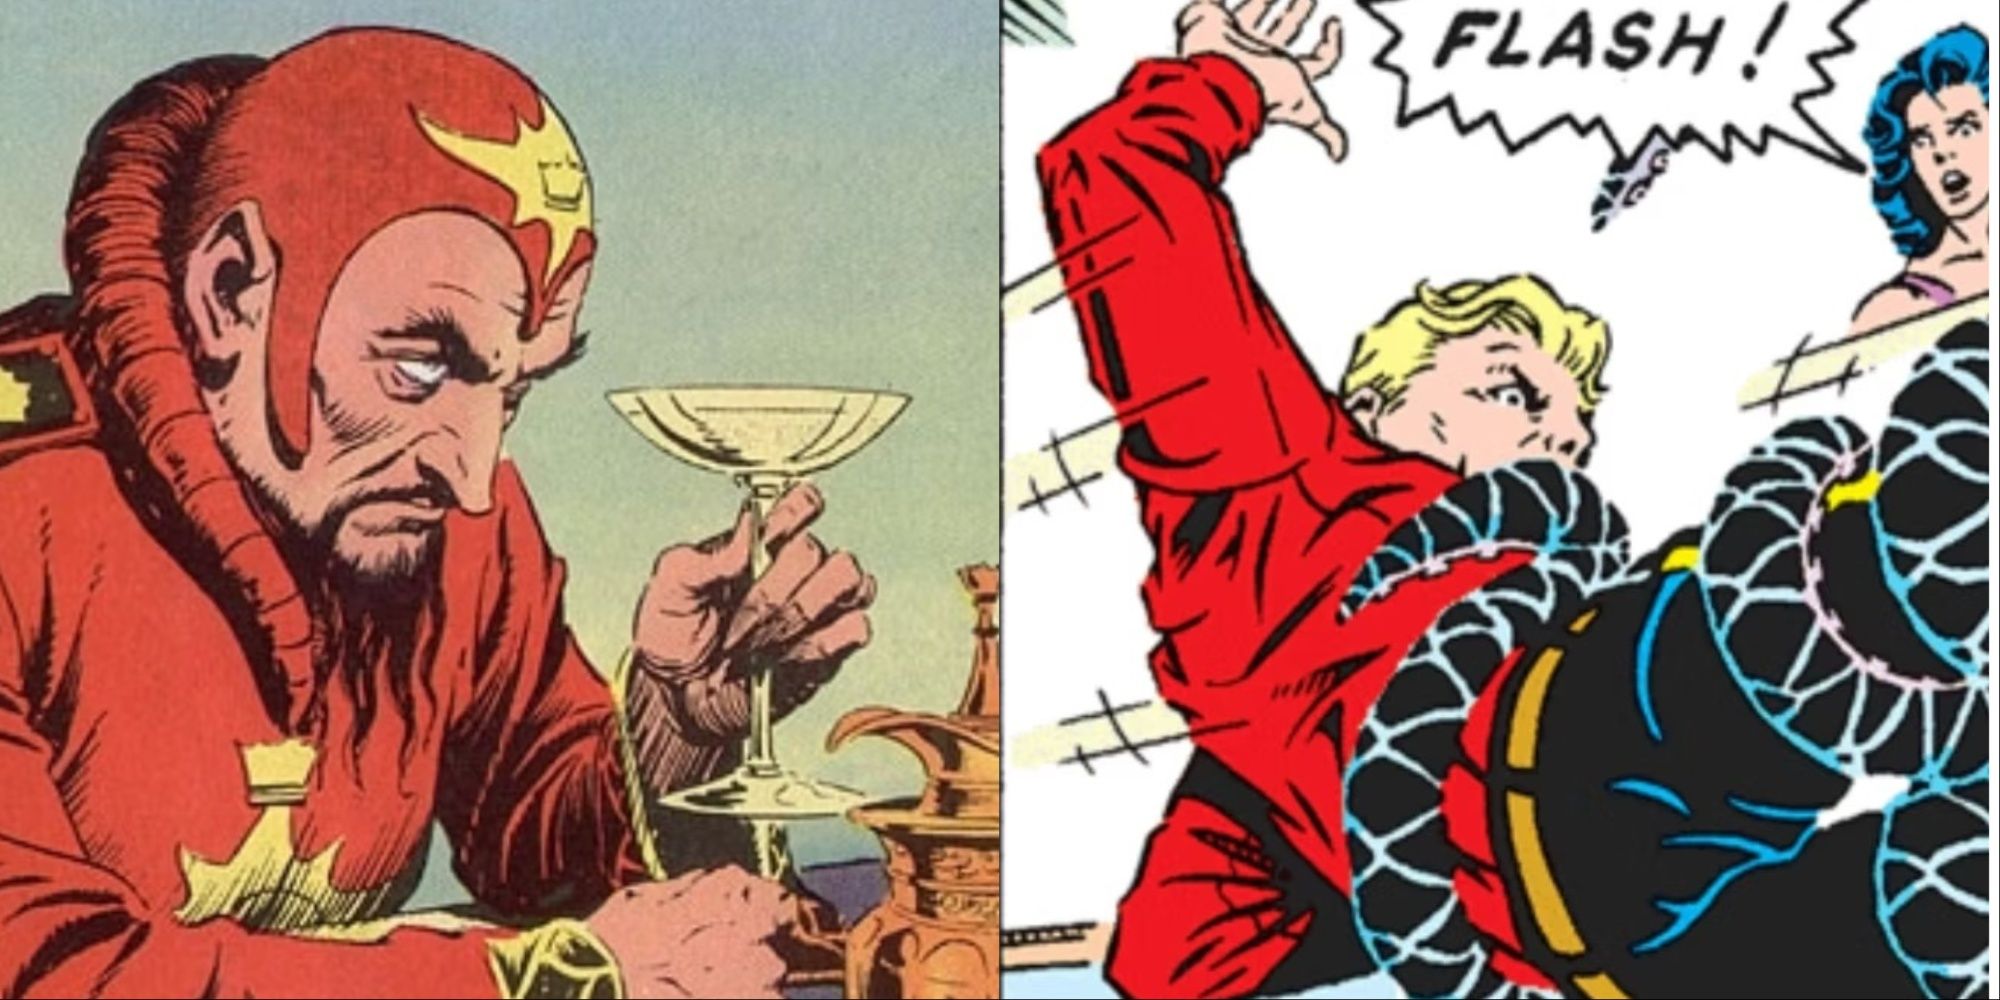 A split image of Ming the Merciless and Flash Gordon in the newspaper comics strips